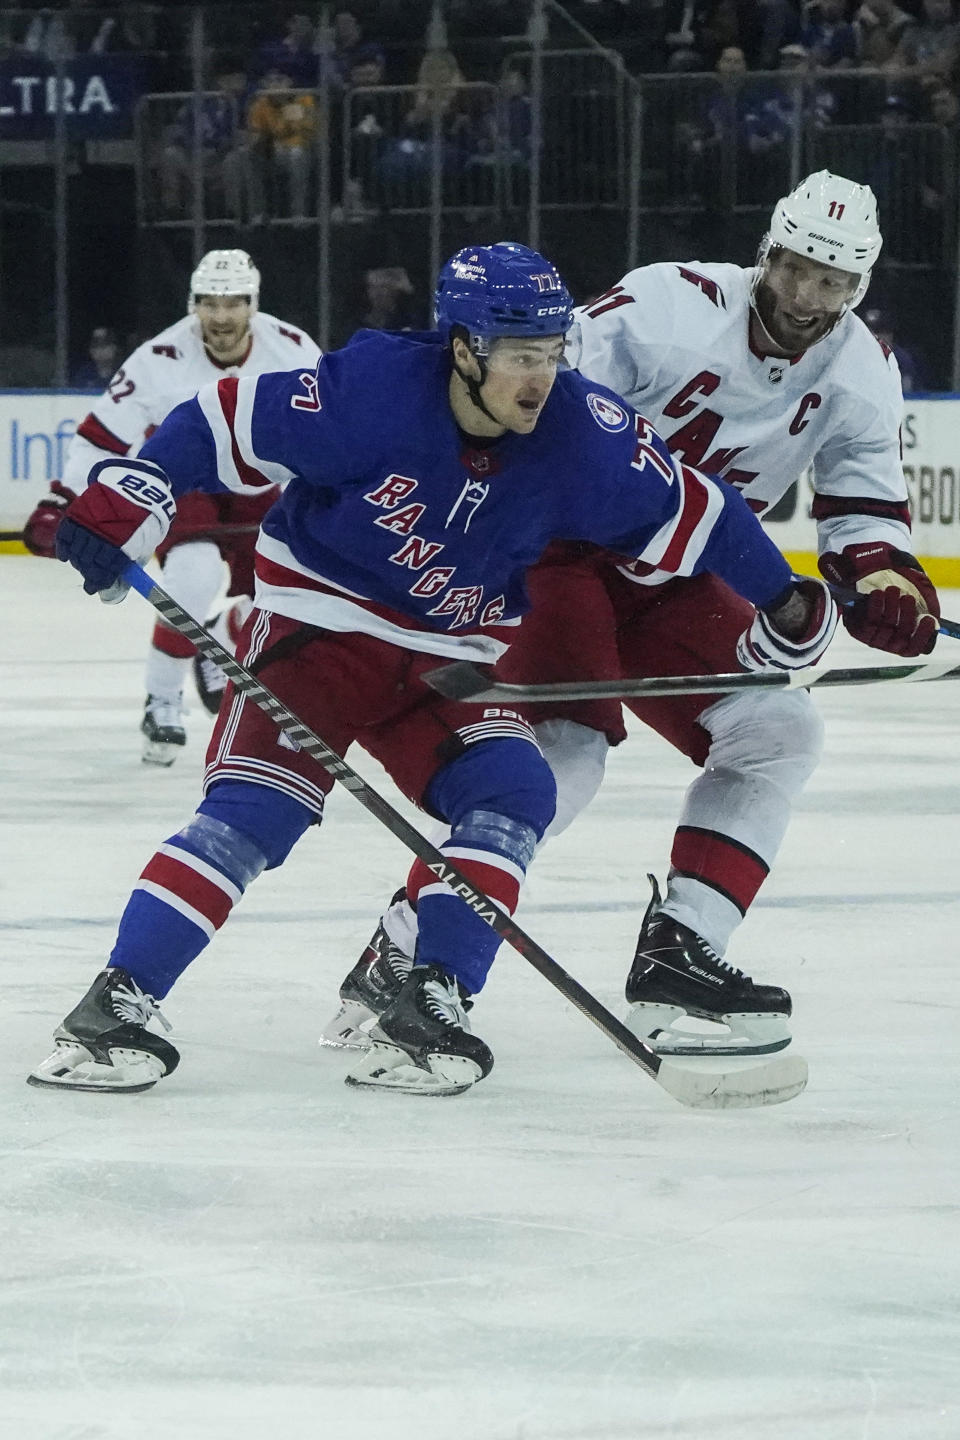 New York Rangers center Frank Vatrano (77) and Carolina Hurricanes center Jordan Staal (11) goes for a loose puck during first period of NHL hockey game, Tuesday, April 12, 2022, in New York. (AP Photo/Bebeto Matthews)